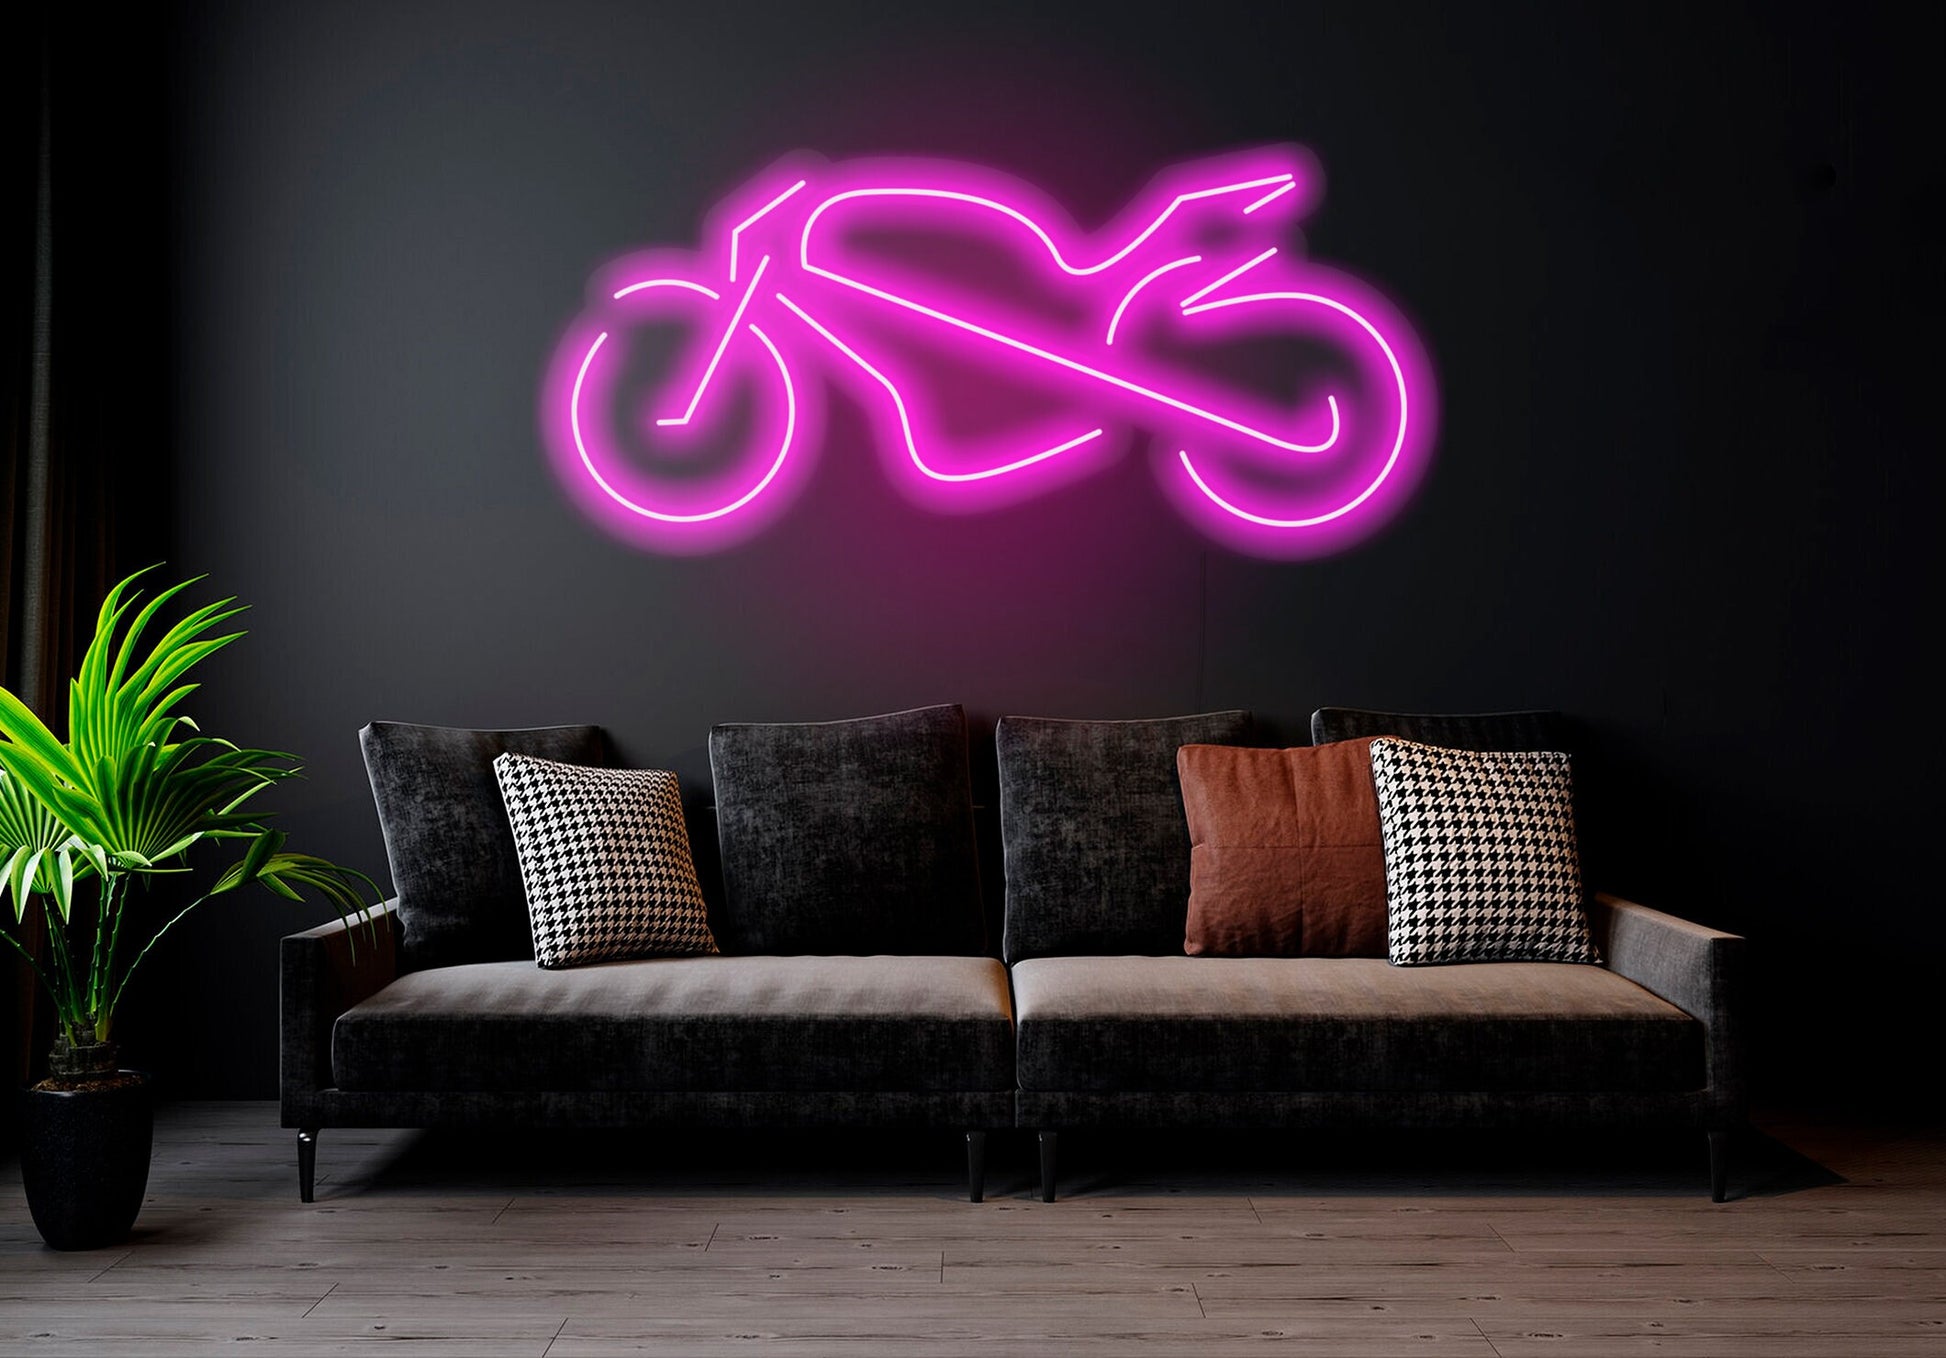 Motorcycle - LED Neon Sign , Home Interior Decor, Neon Lights, Bedroom neon sign, Neon sign wall decor